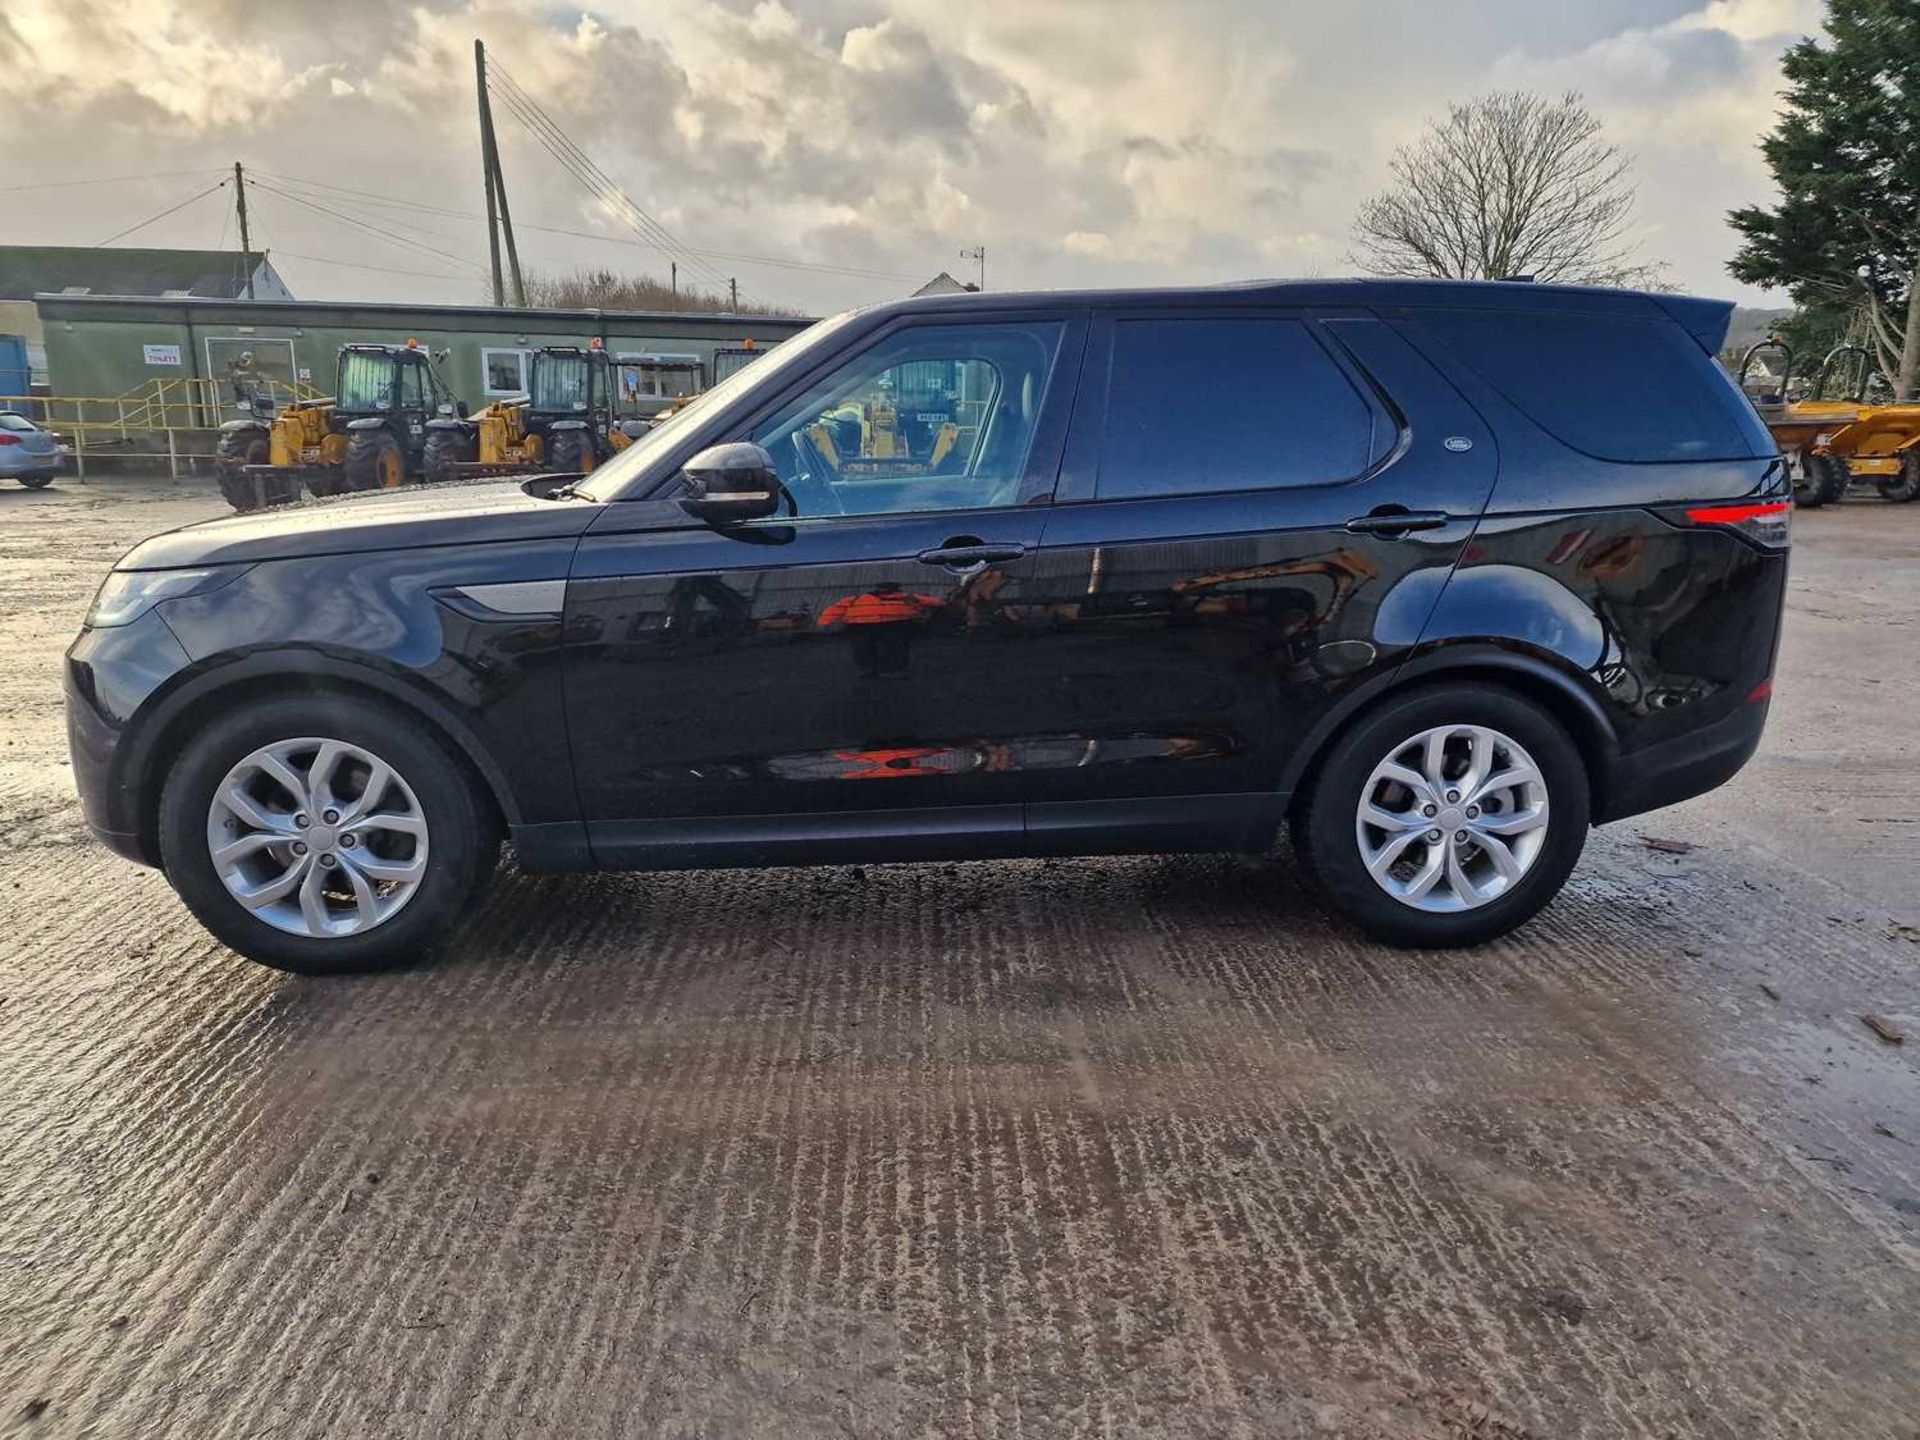 2019 Landrover Discovery SD4 SE 240 Commercial, Auto, Paddle Shift, Sat Nav, Reverse Camera, Parking - Image 2 of 26